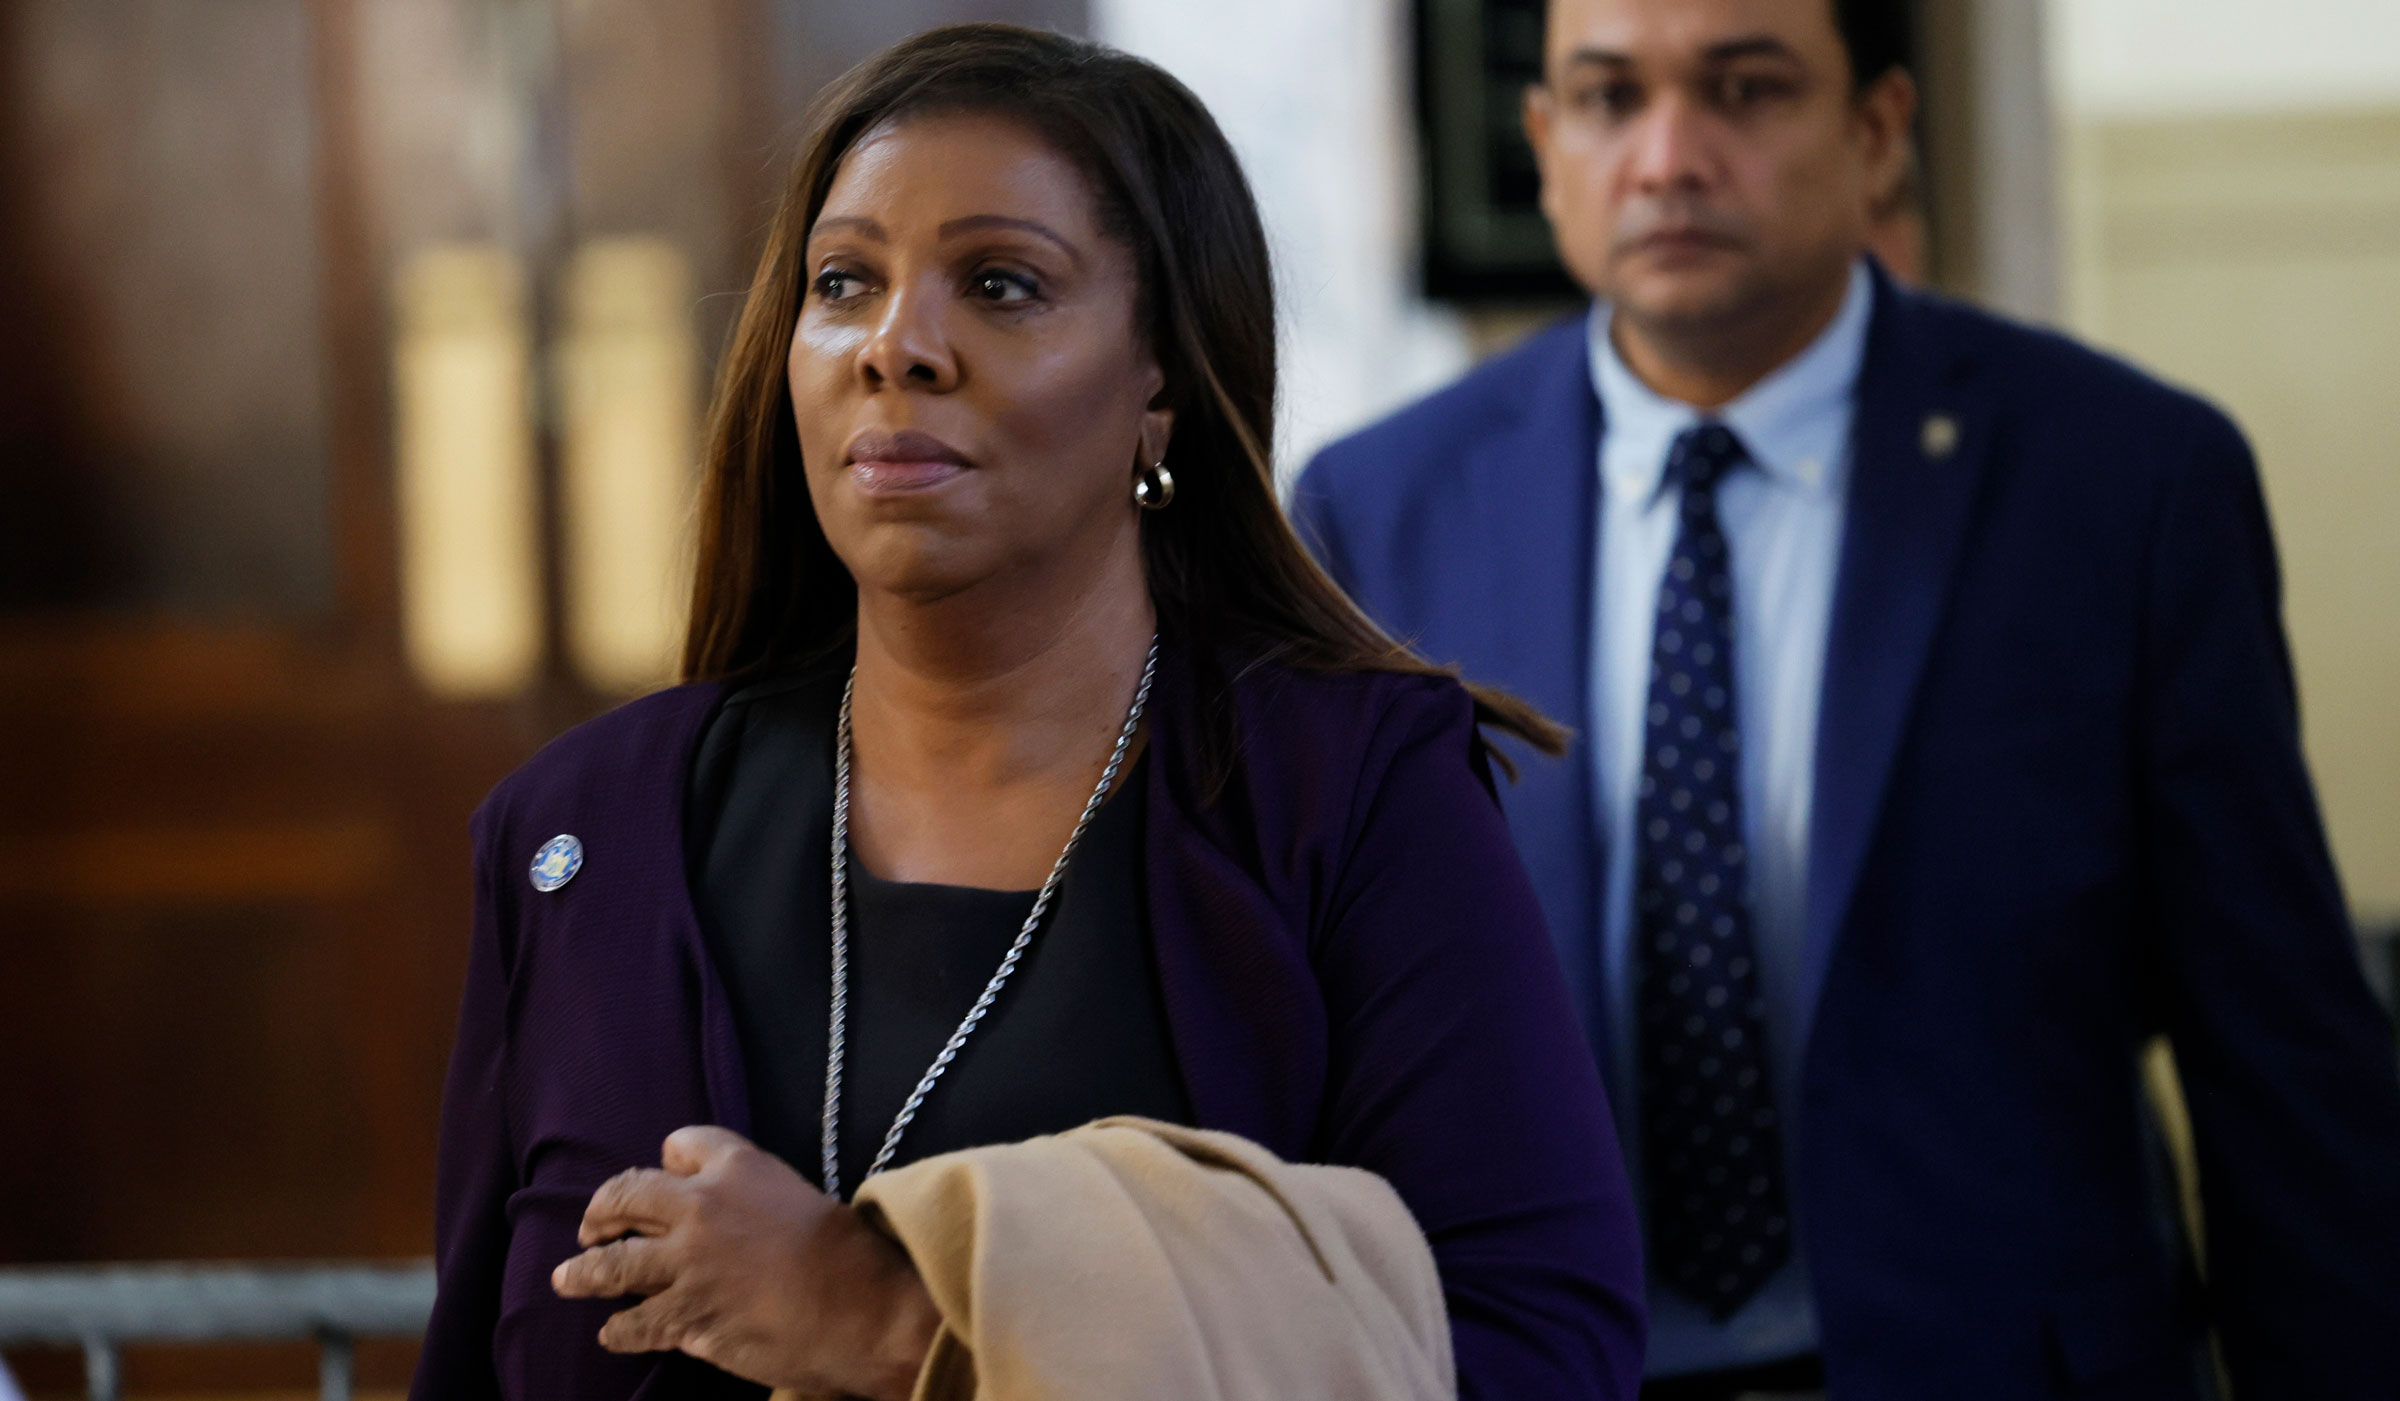 New York Attorney General Letitia James exits the courtroom during the civil fraud trial in November.